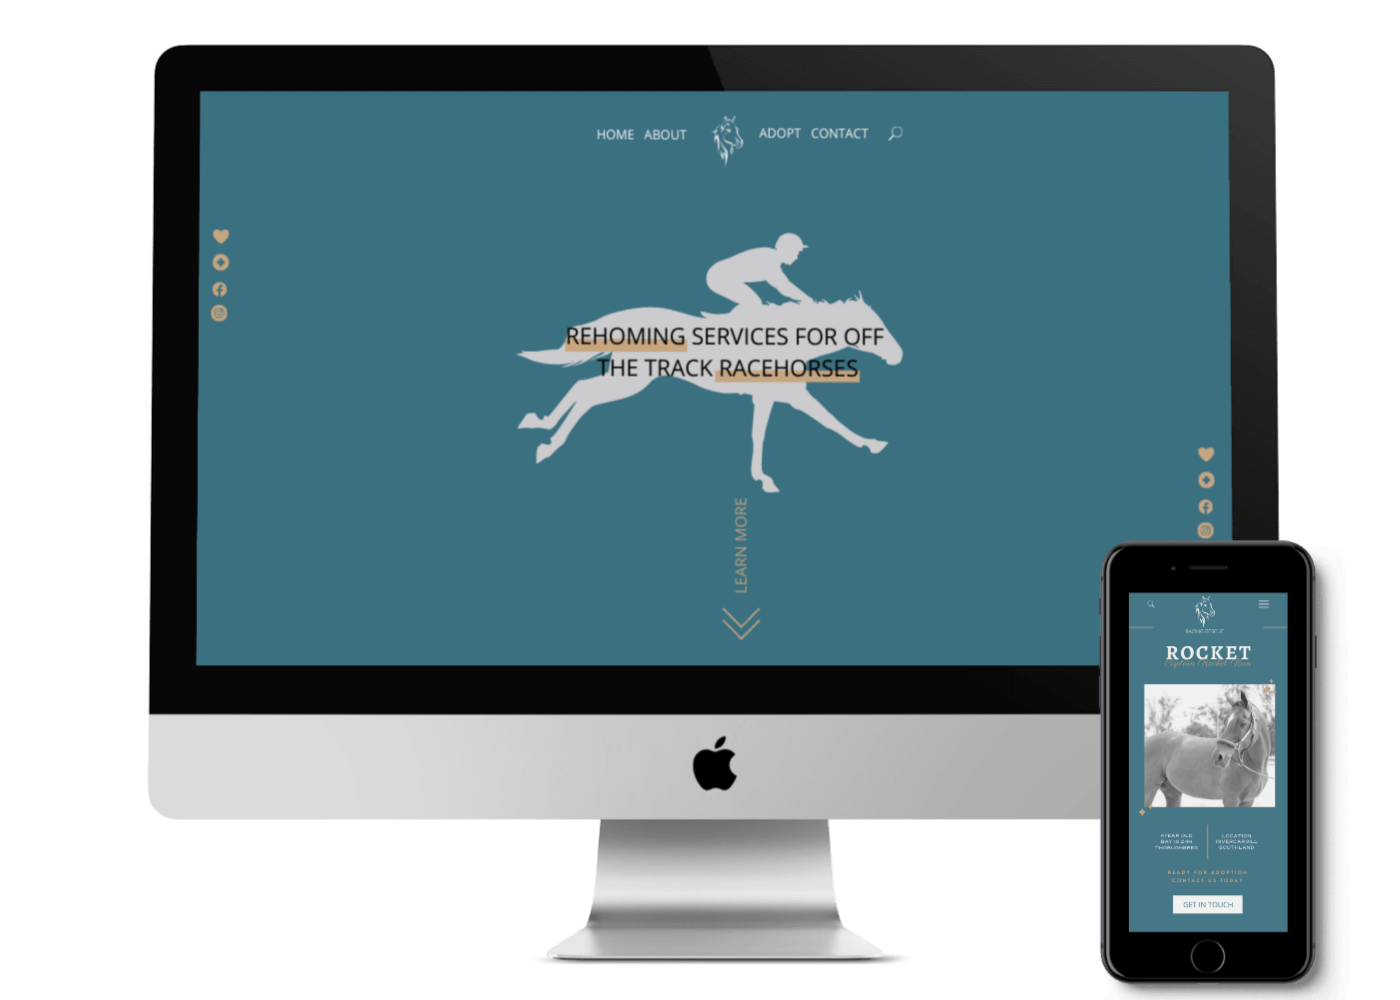 Wanaka web design services, example of responsive website on desktop and mobile.